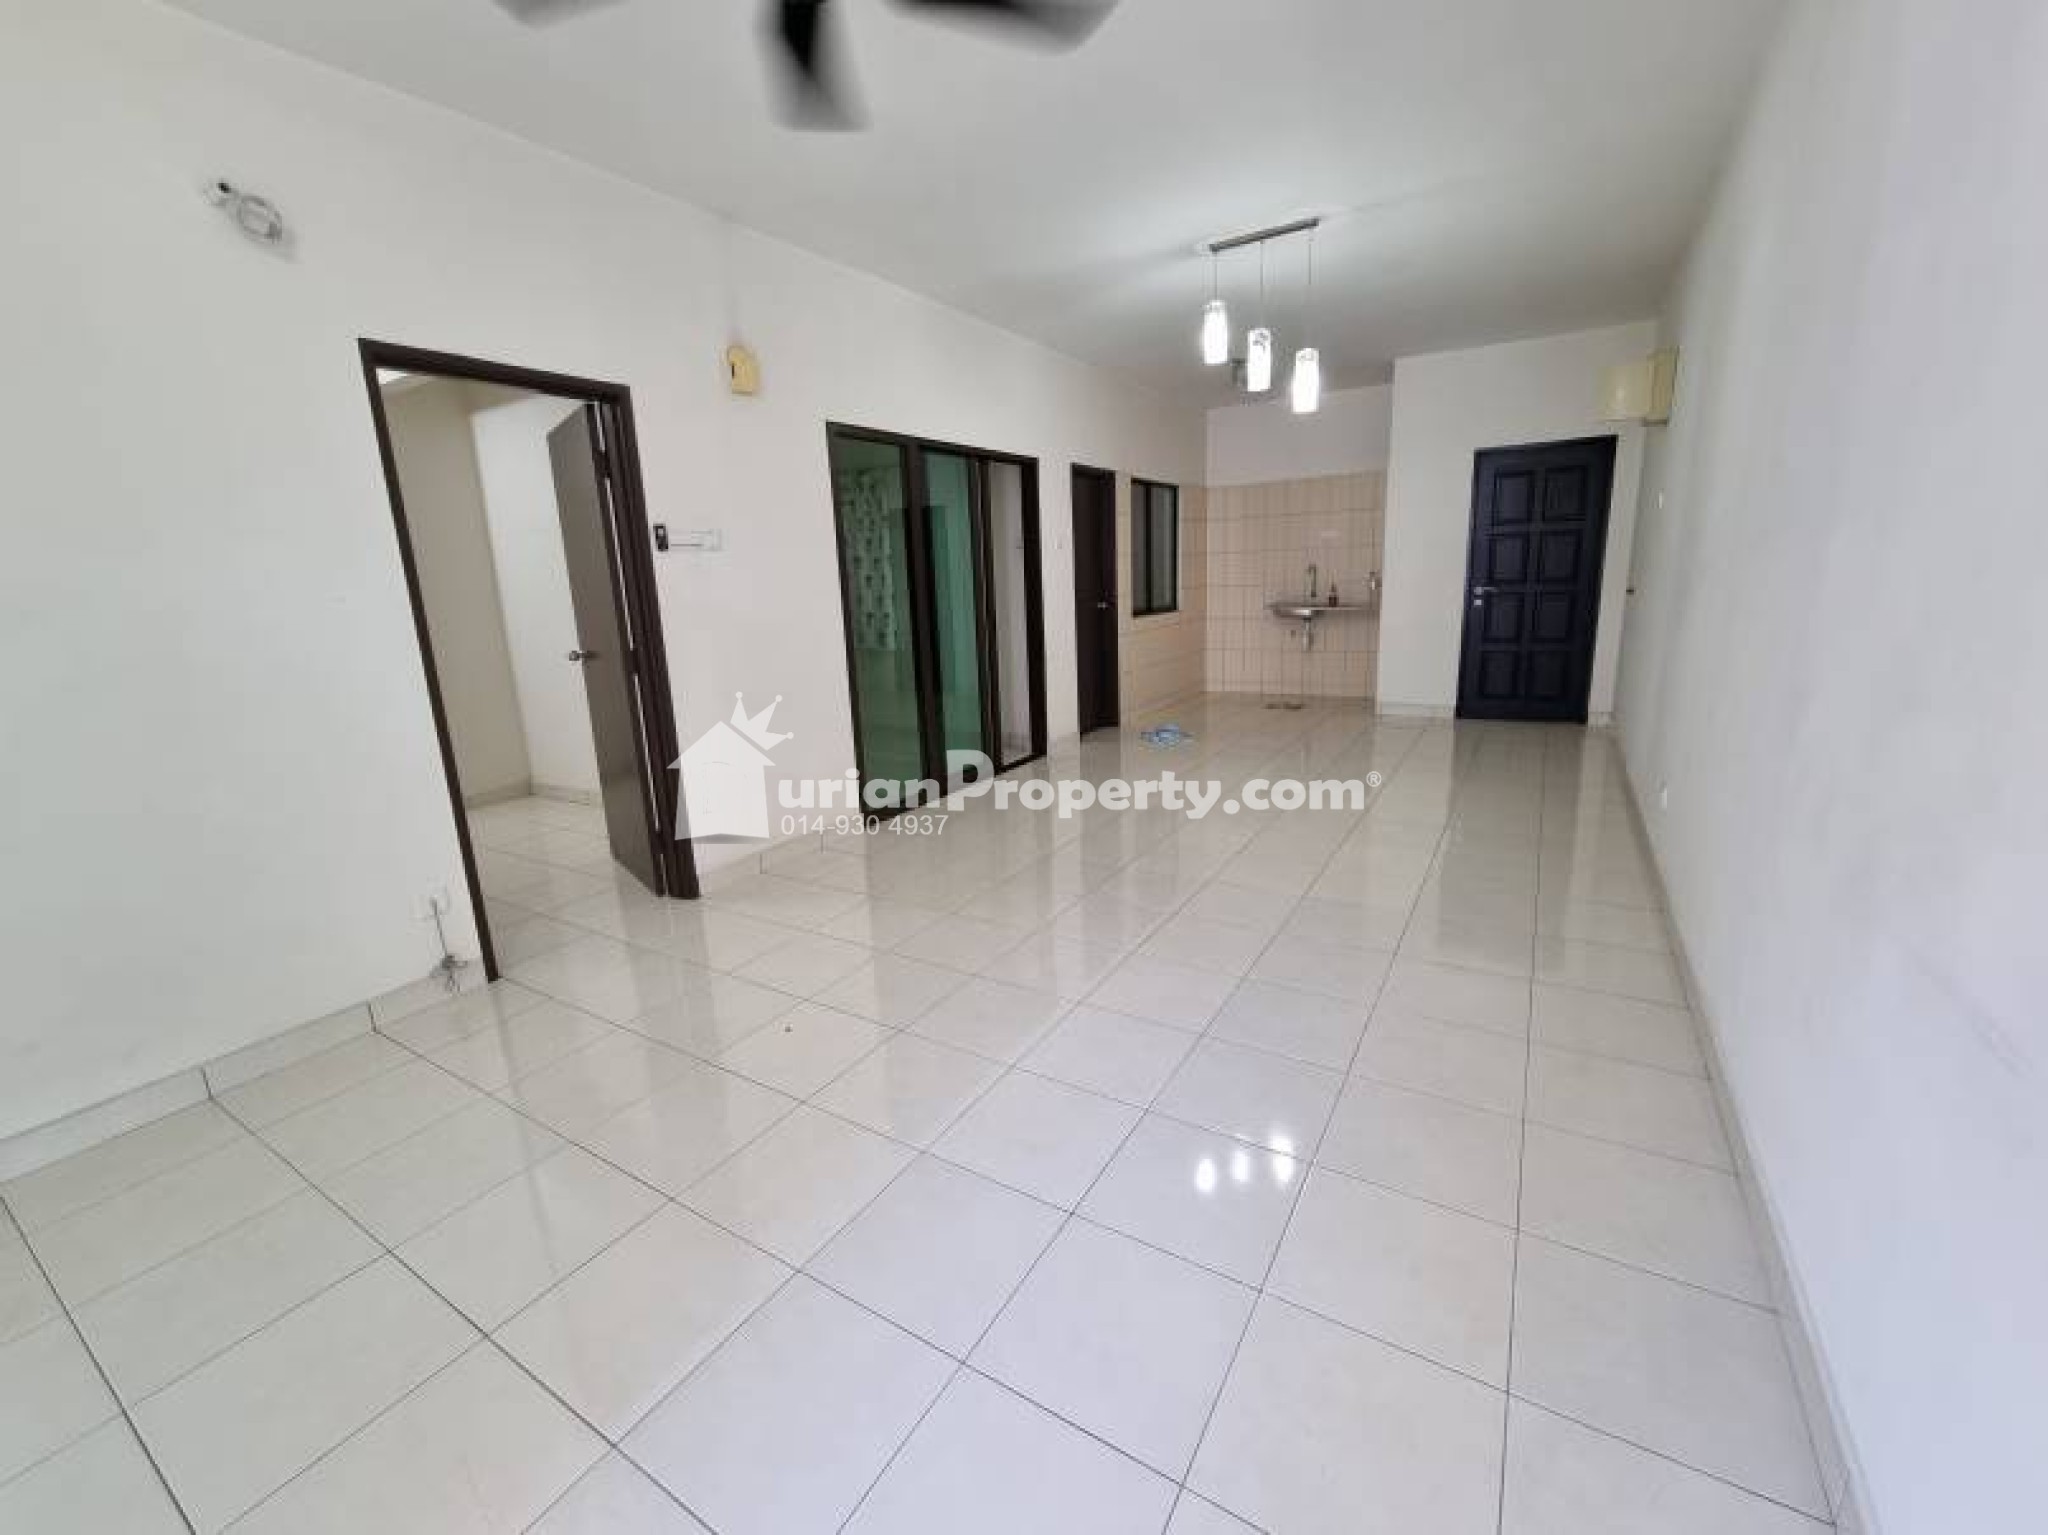 Condo For Rent at Indah Alam